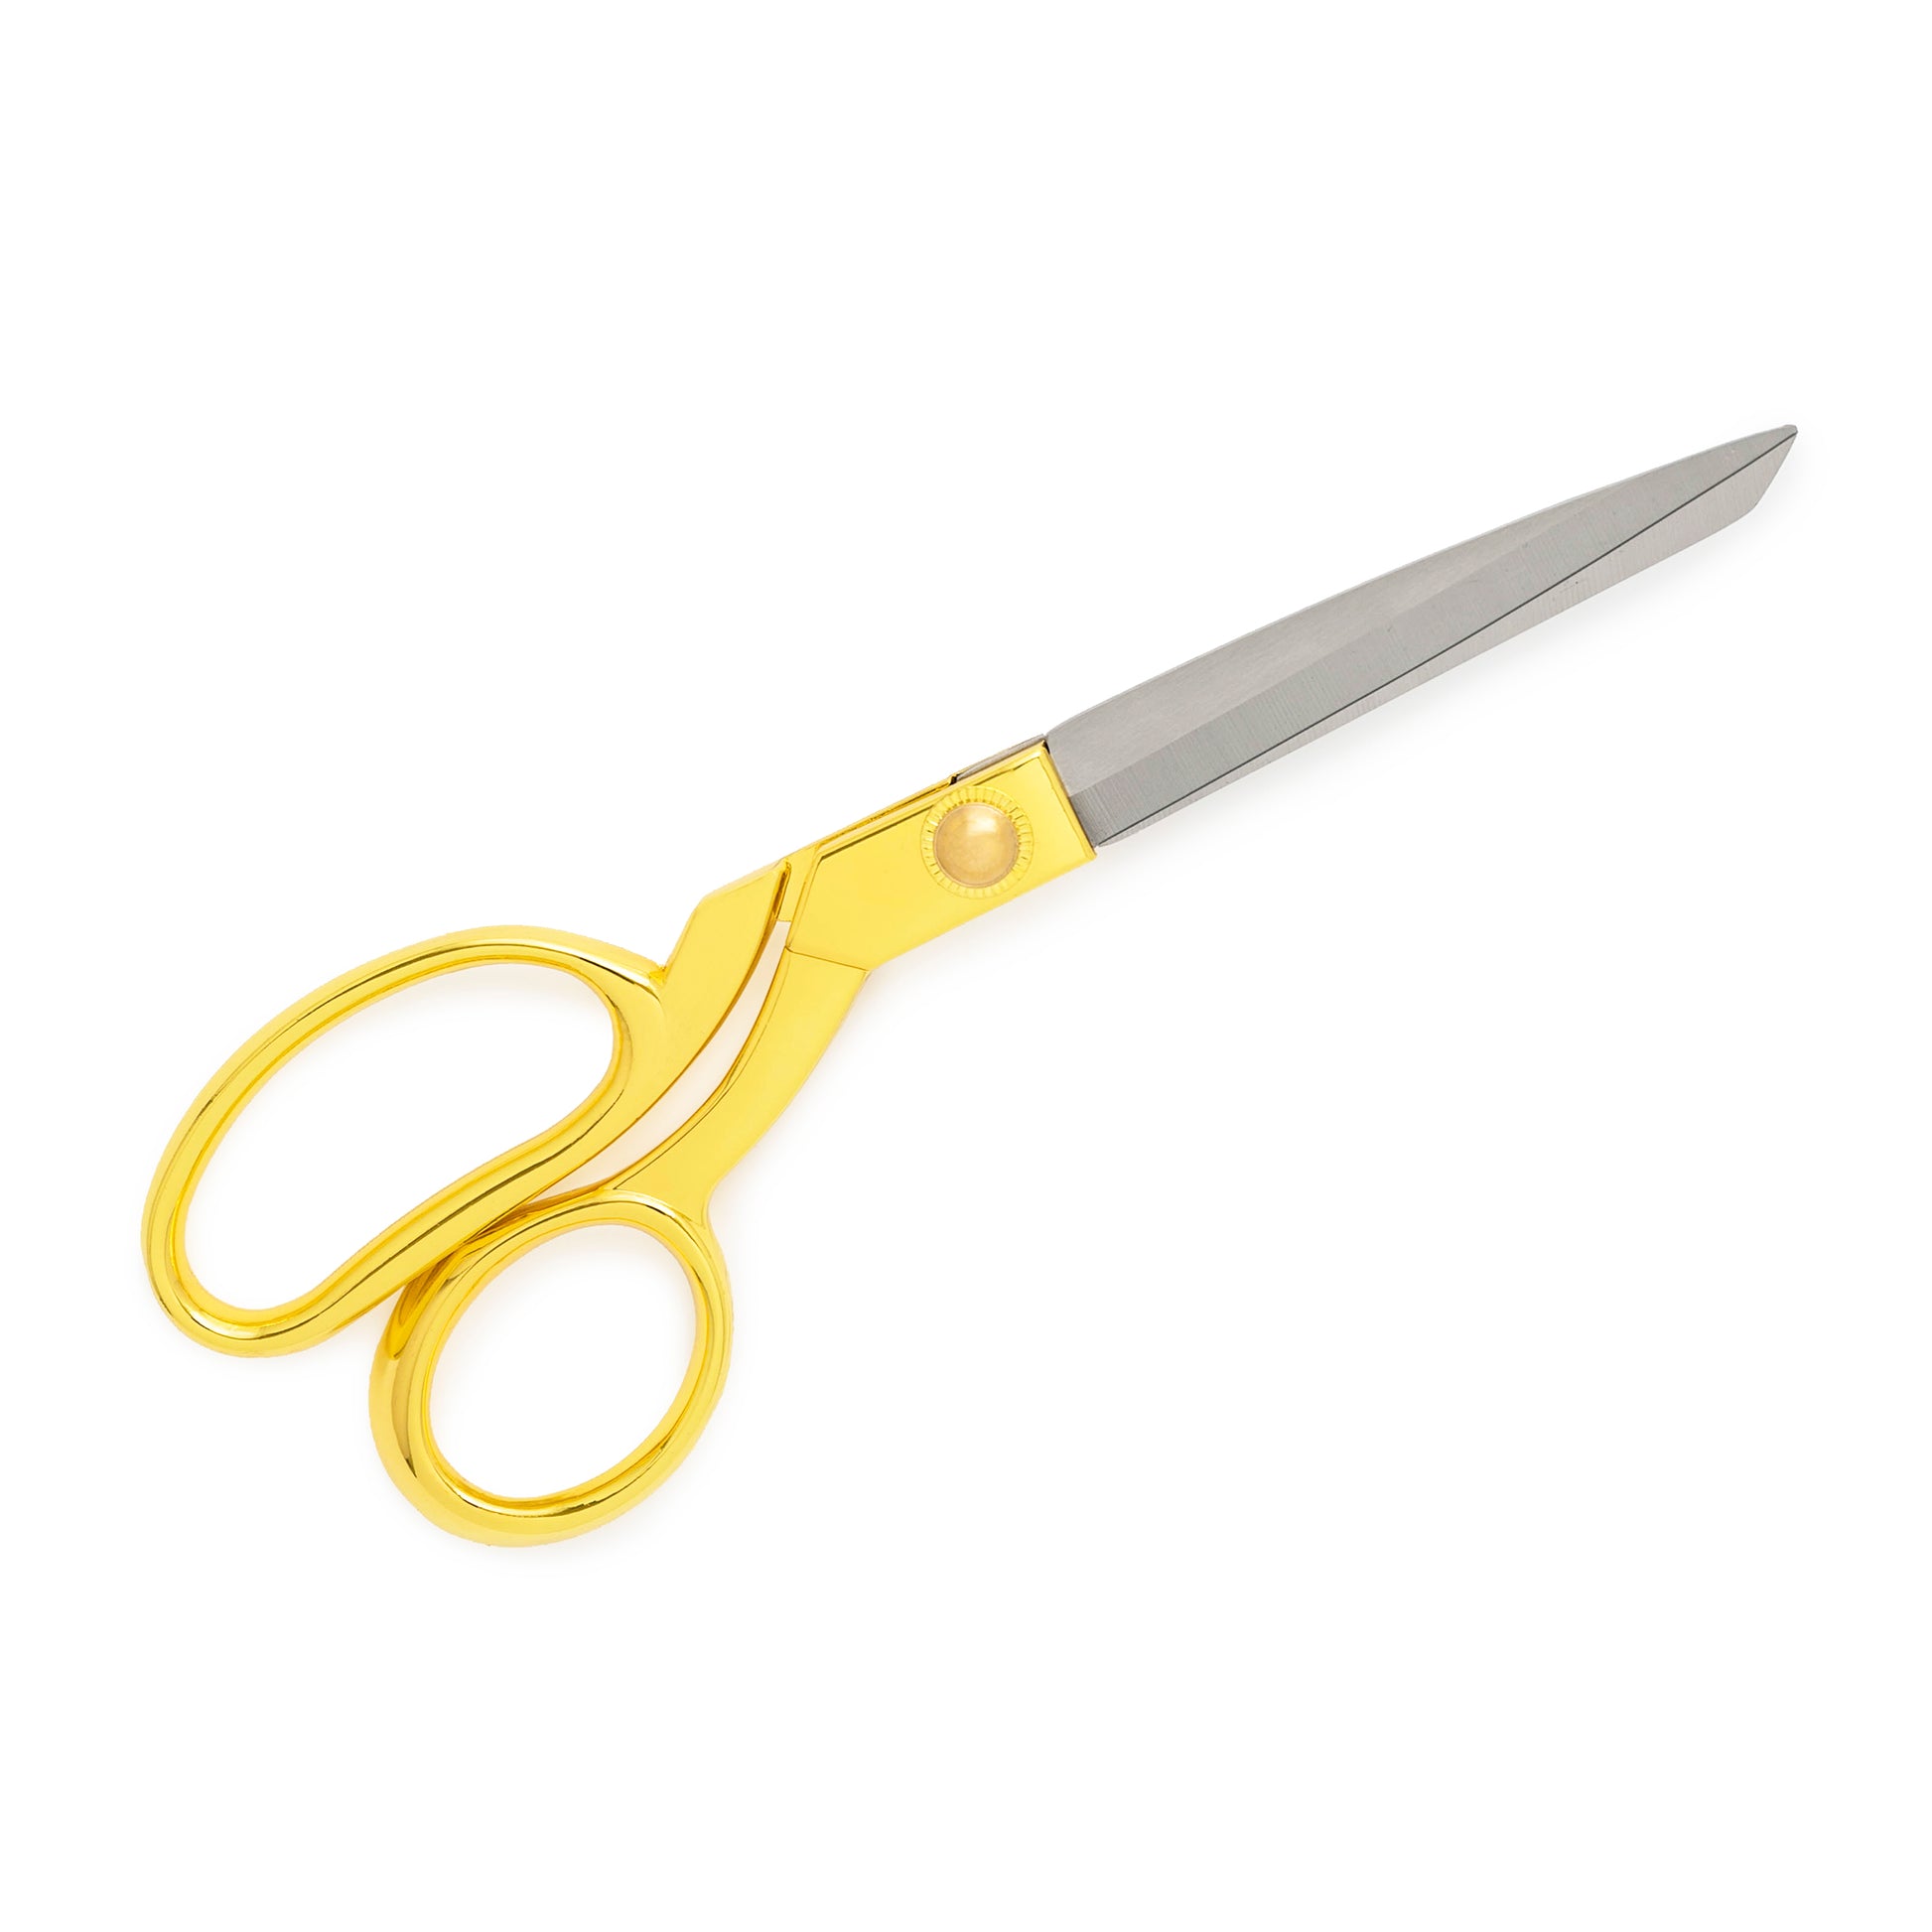  7.7 Inch Craft Scissors All Purpose Fabric Sewing Scissors  Acrylic Sharp Stainless Steel Shears Paper Cutter for School Office  Supplies (Gold) : Arts, Crafts & Sewing